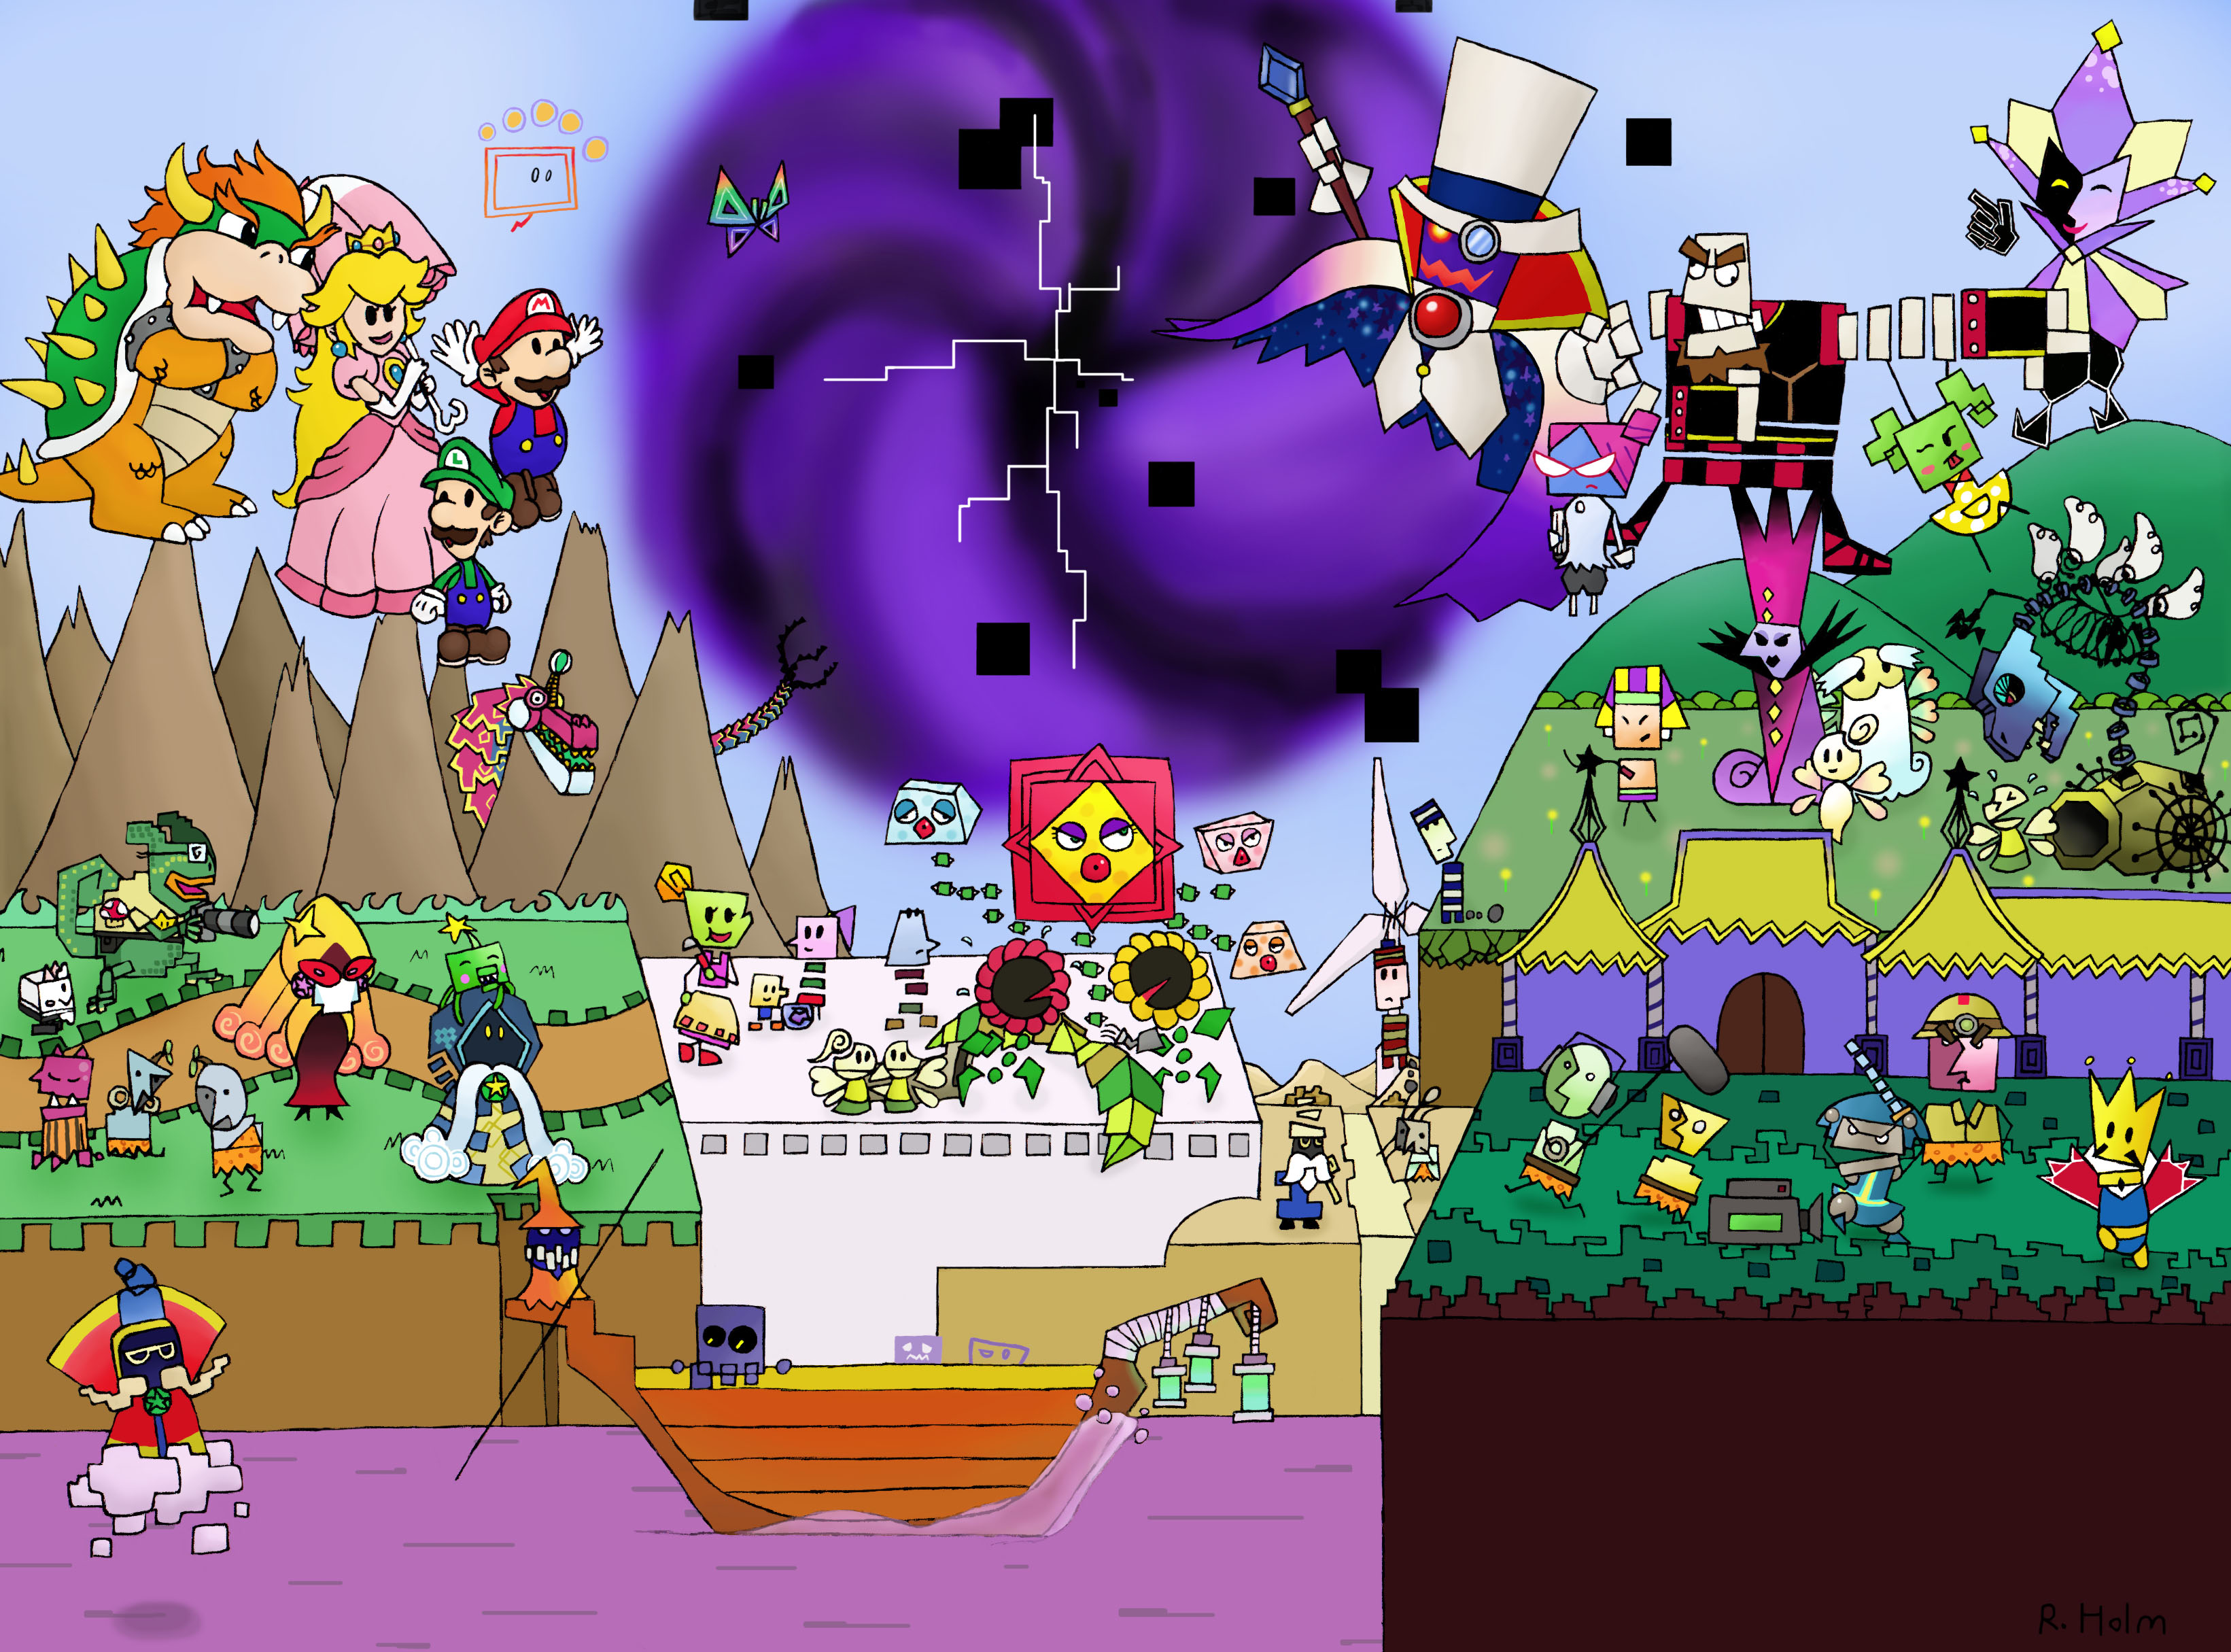 Video Game Super Paper Mario HD Wallpapers. 